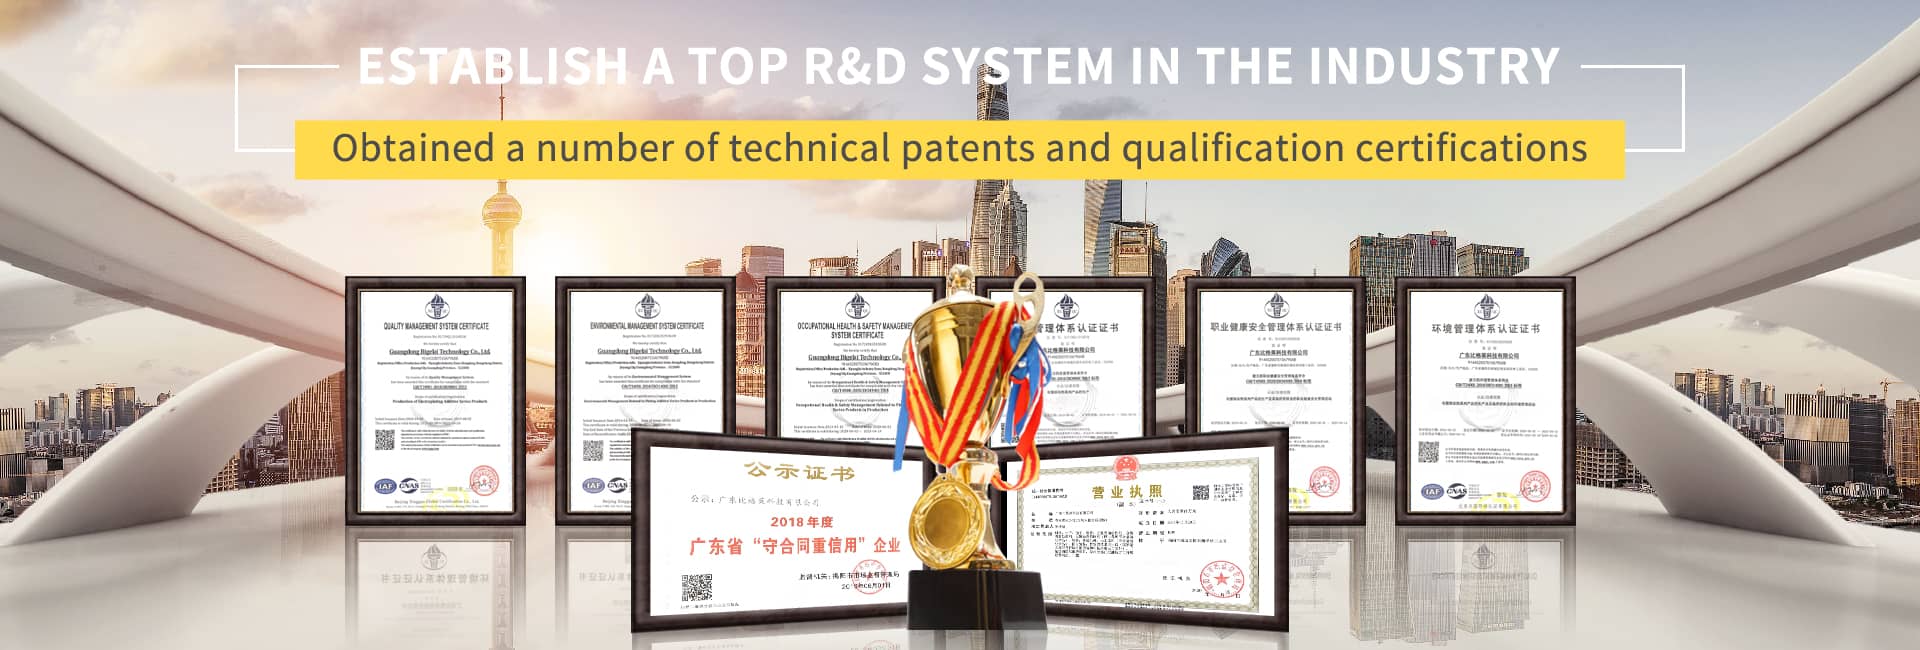 Establish a top R&D system in the industry